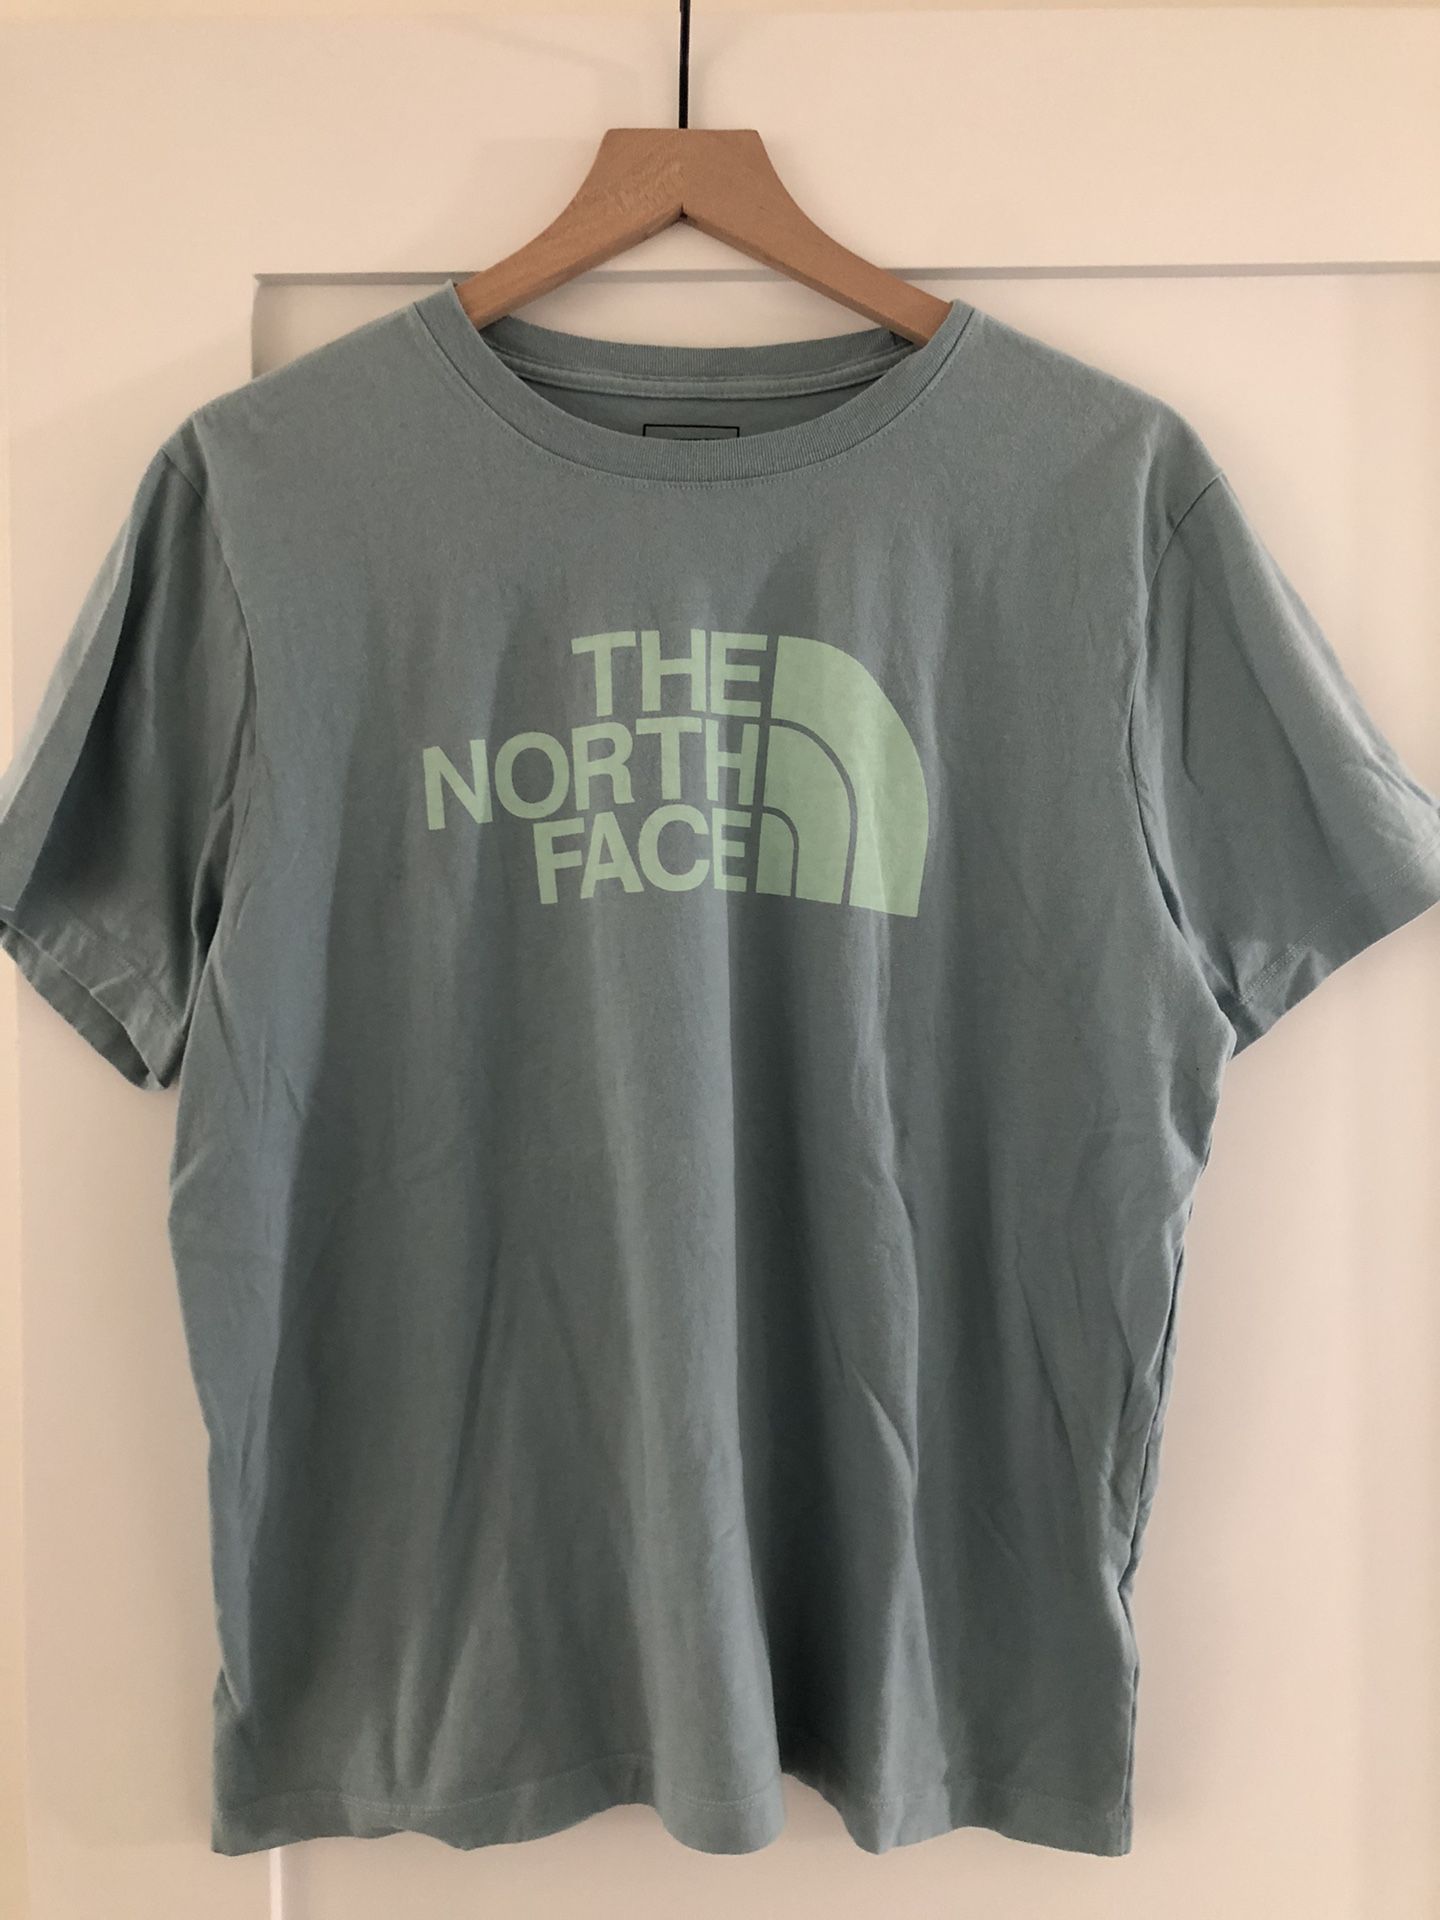 The North Face T- Shirt in size XL